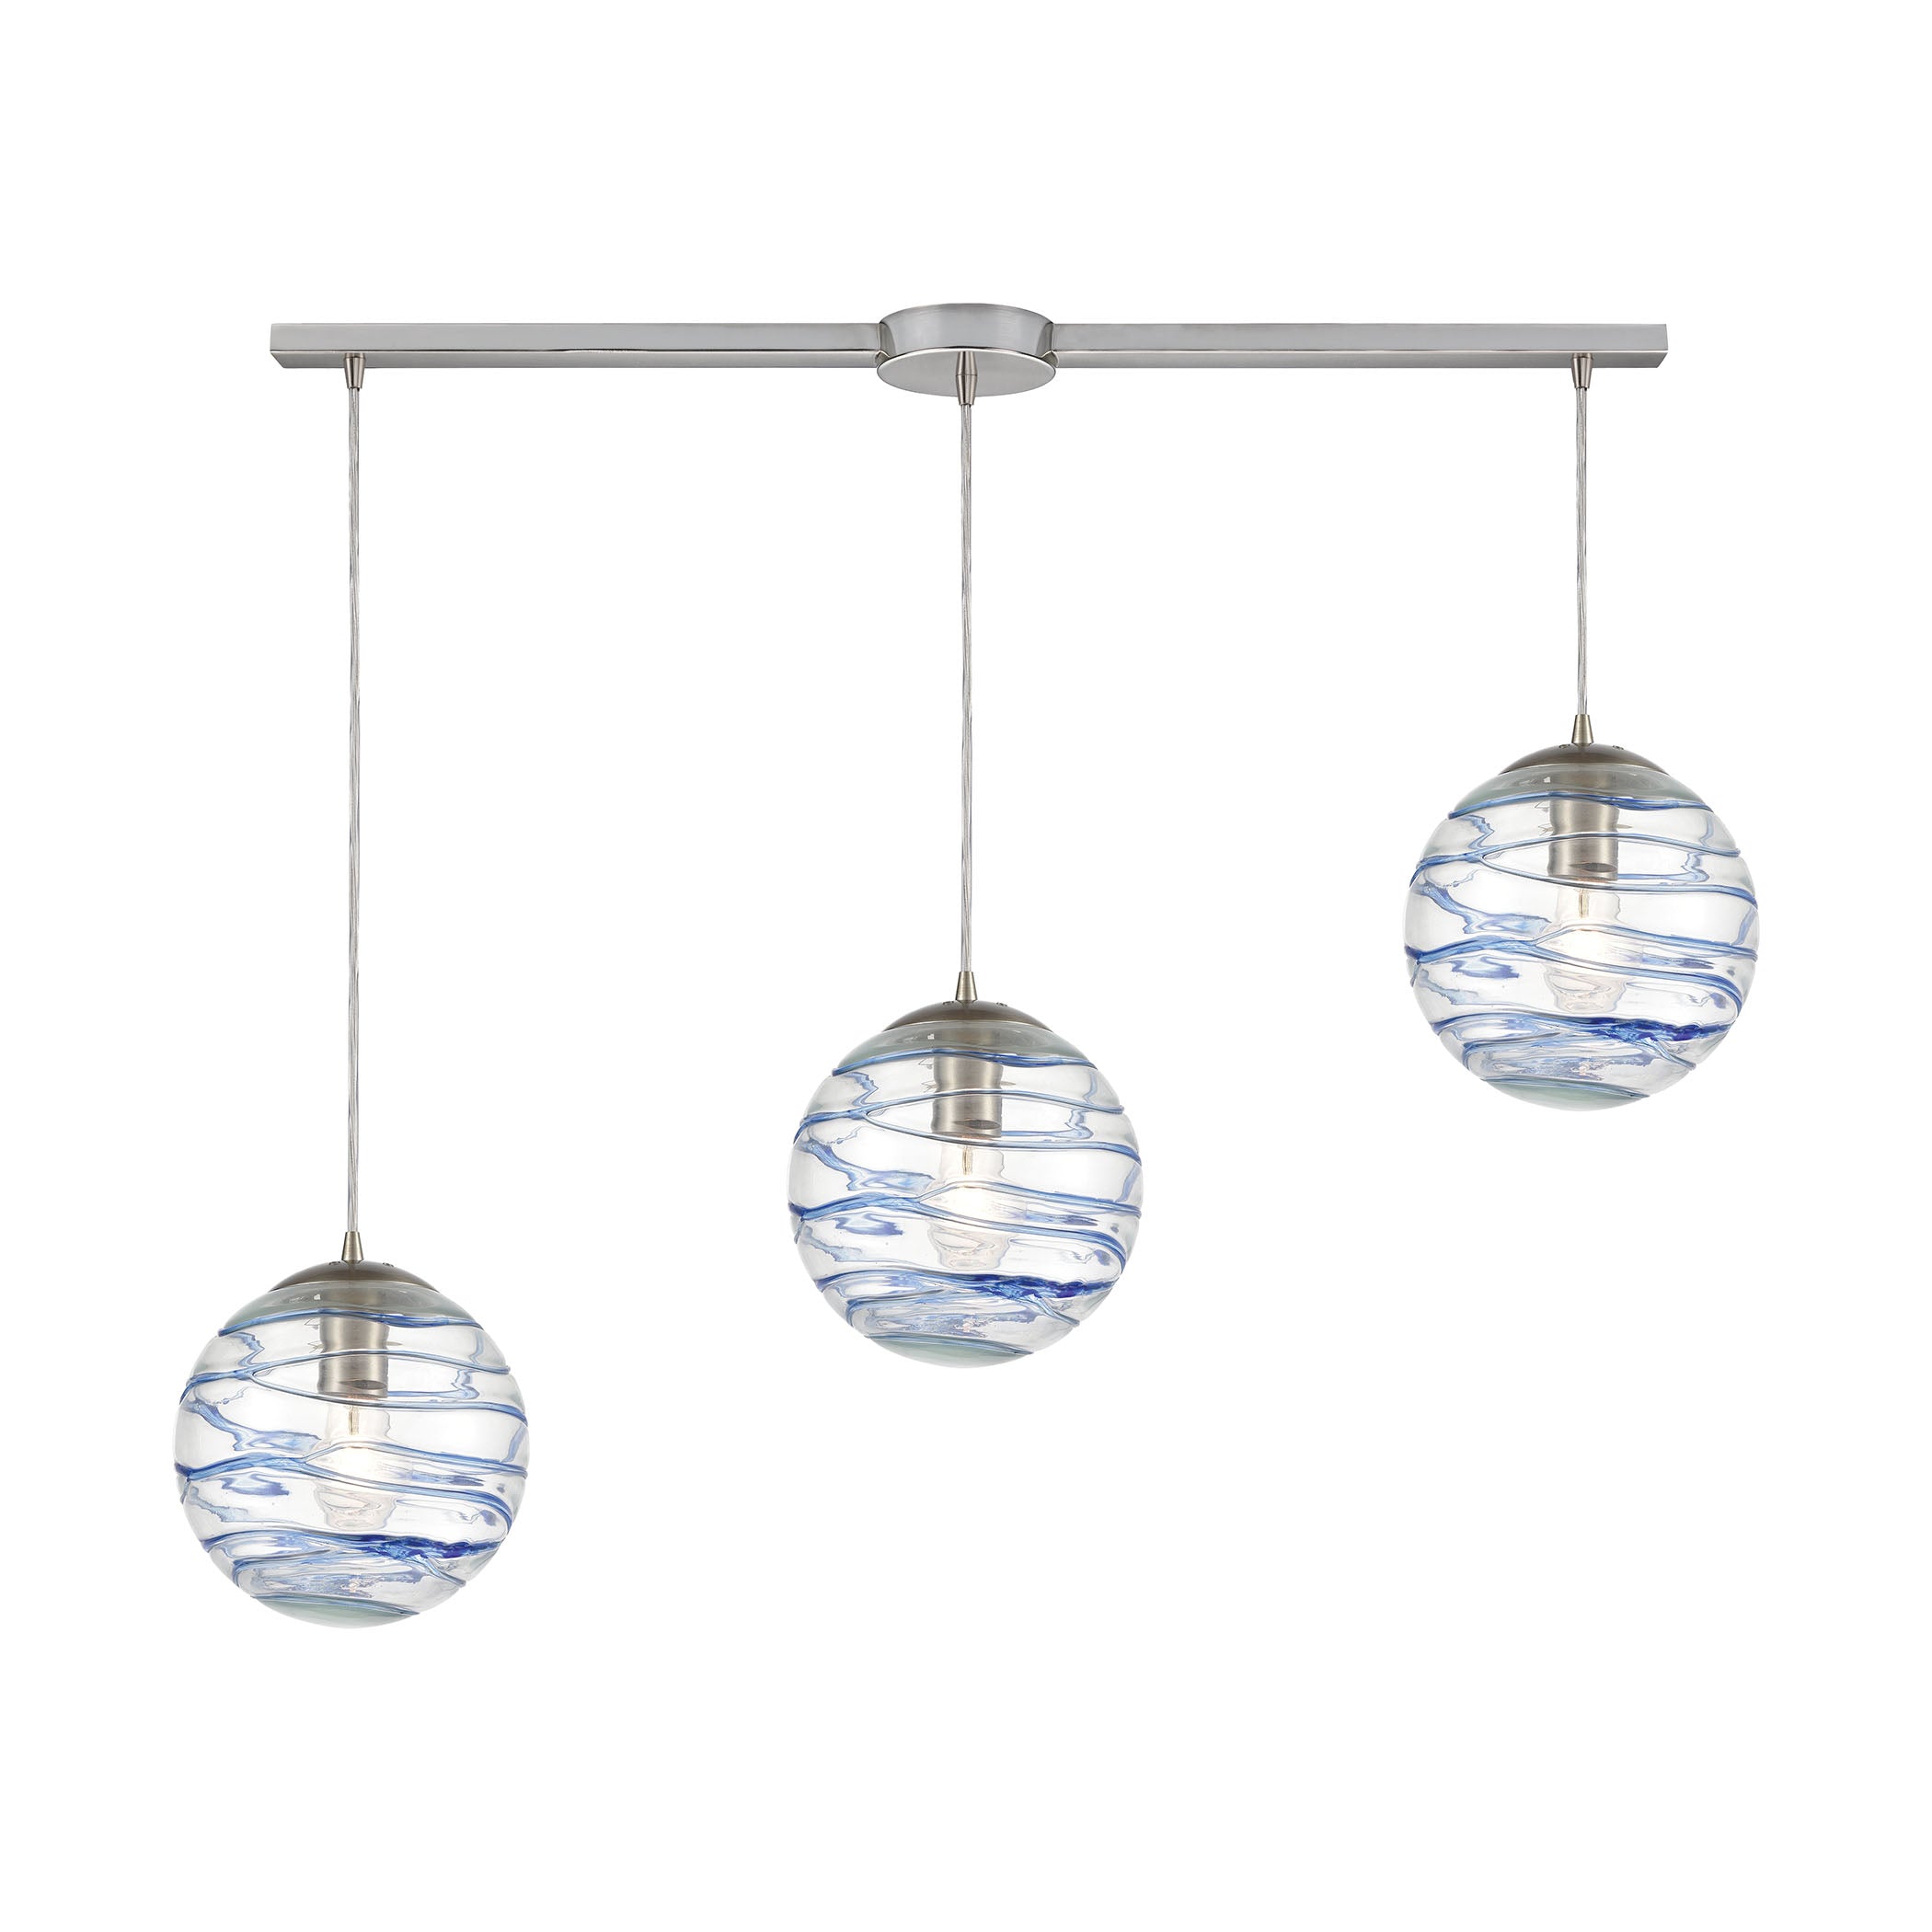 ELK Lighting 31743/3L Vines 3-Light Linear Mini Pendant Fixture in Satin Nickel with Clear Glass with Aqua Blue Strip